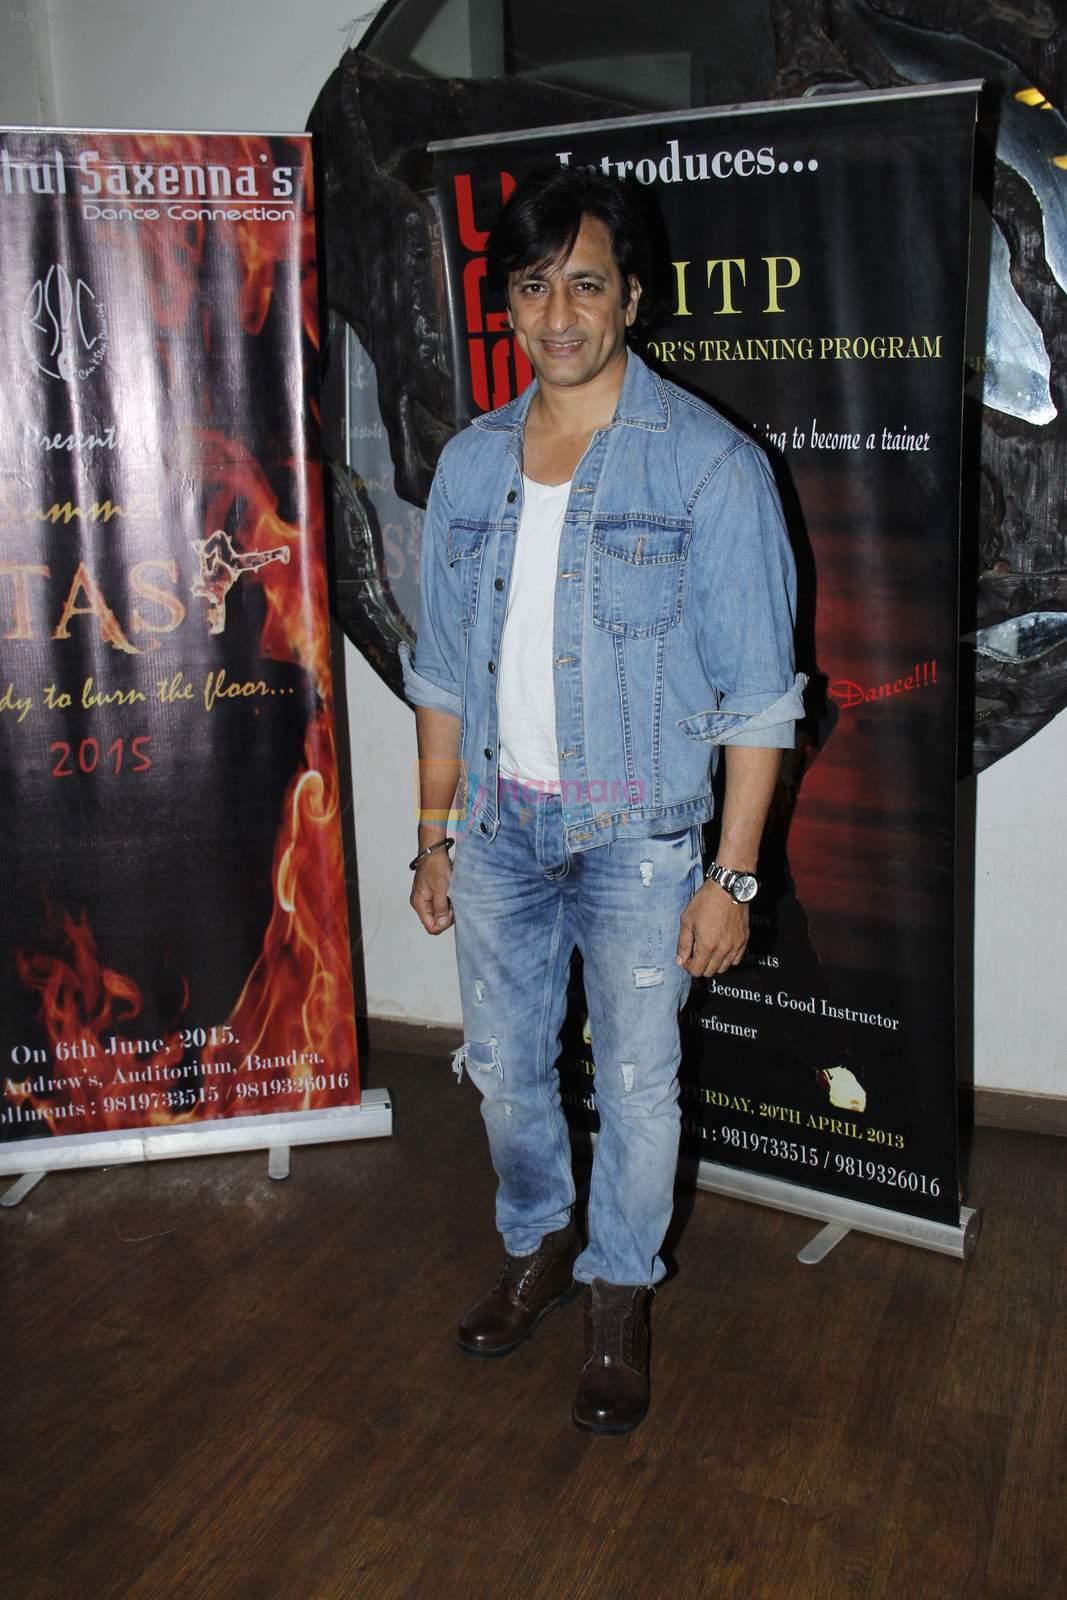 Rajiv Paul at Rahul Saxena's Dance Fest at St. Andrews on 6th June 2015